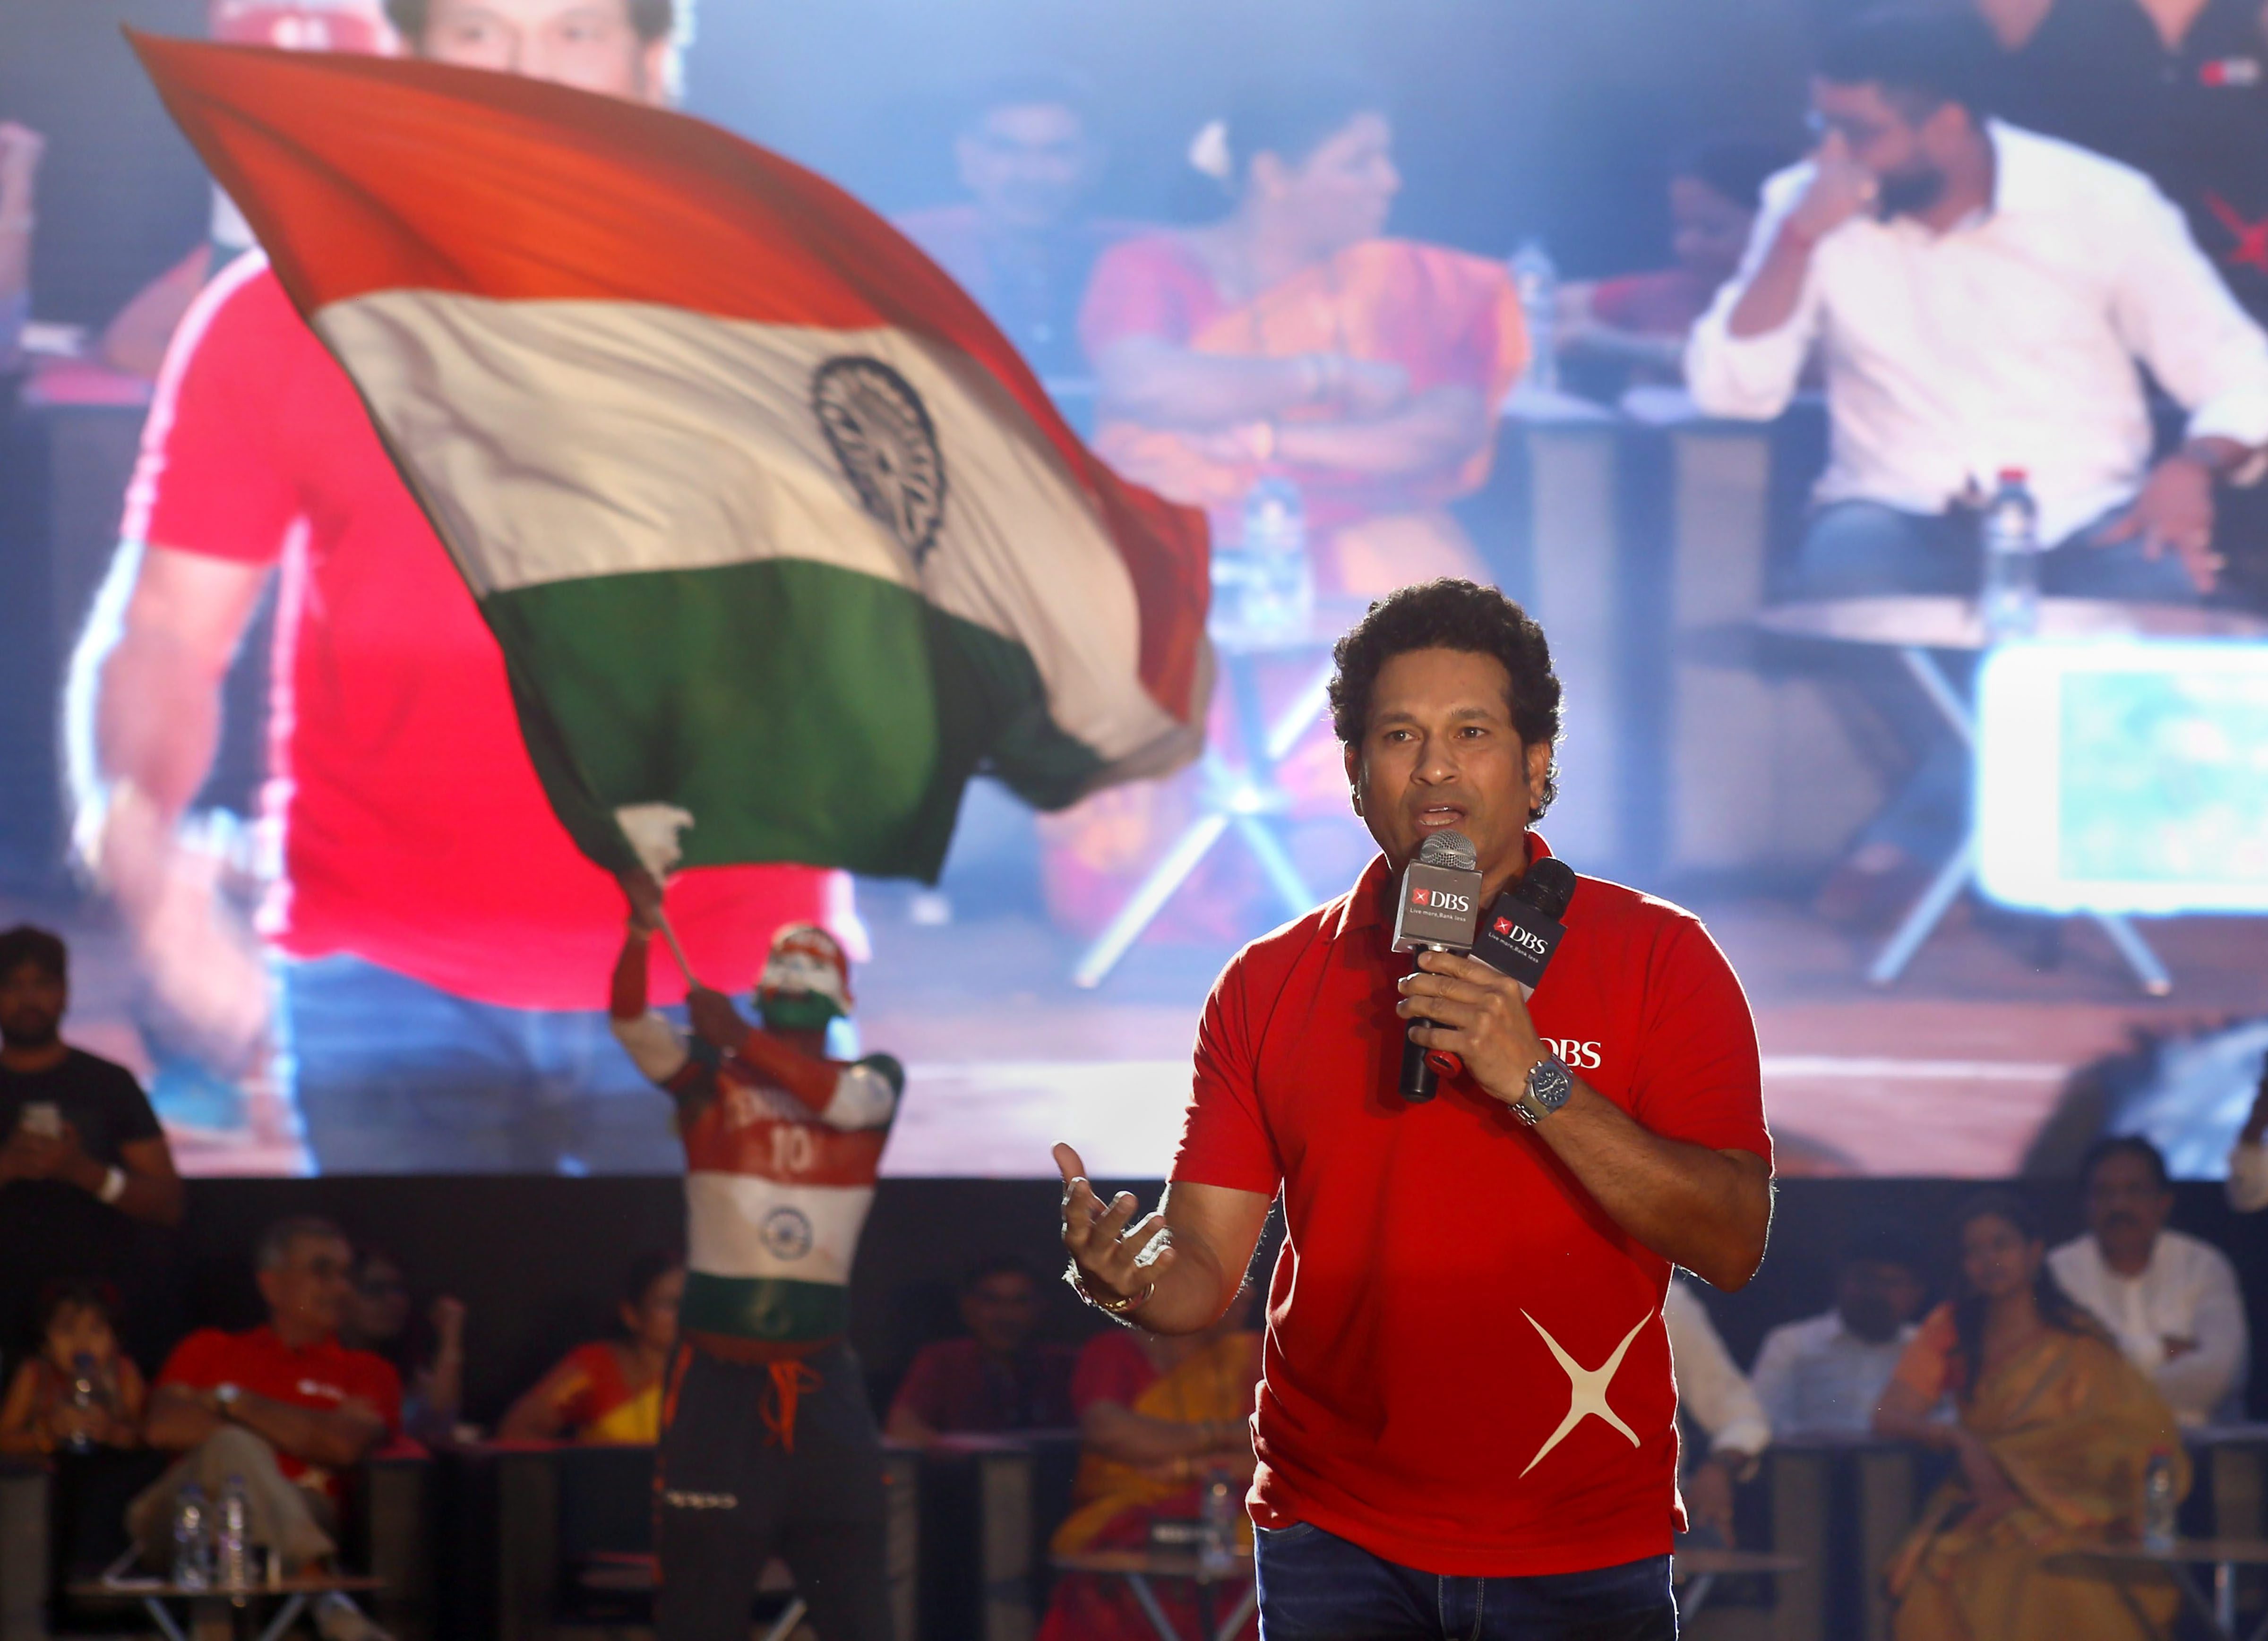 Sachin Tendulkar pointed out that the “nature of wickets” will have a significant bearing on the outcome.